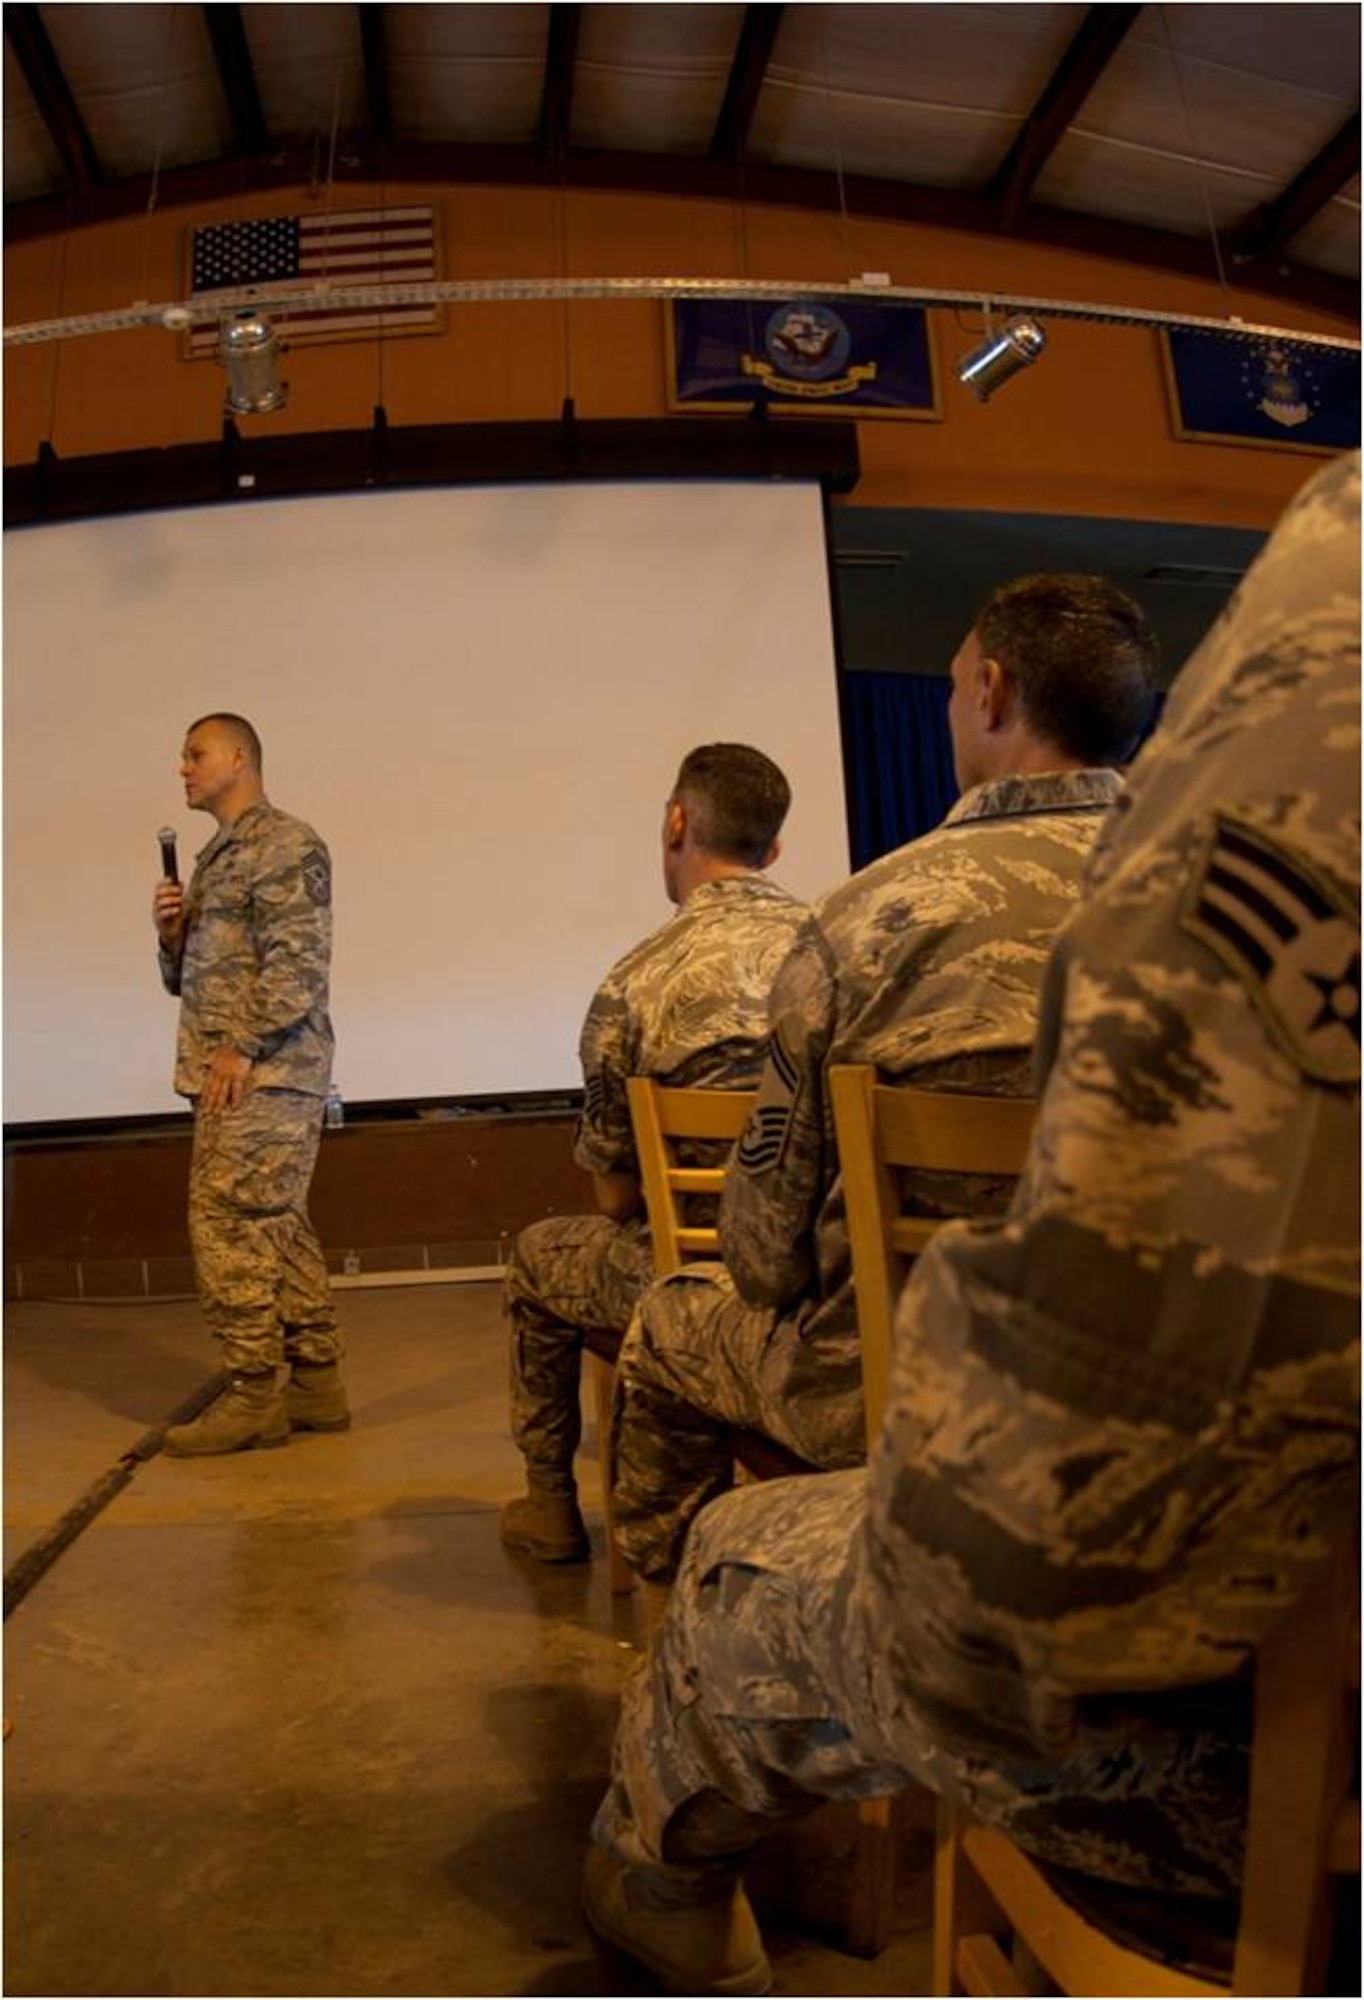 Chief Master Sgt. of the Air Force James A. Roy speaks to Airmen deployed to Camp Lemonnier, Combined Joint Task Force – Horn of Africa and other tenant commands during an Air Force all-call at the camp’s Morale, Welfare and Recreation facility here, May 6. Roy interacted with the Airmen to address their concerns and share information regarding the Air Force directly from a senior enlisted leadership perspective. (U.S. Air Force photo by Senior Airman Lael Huss)